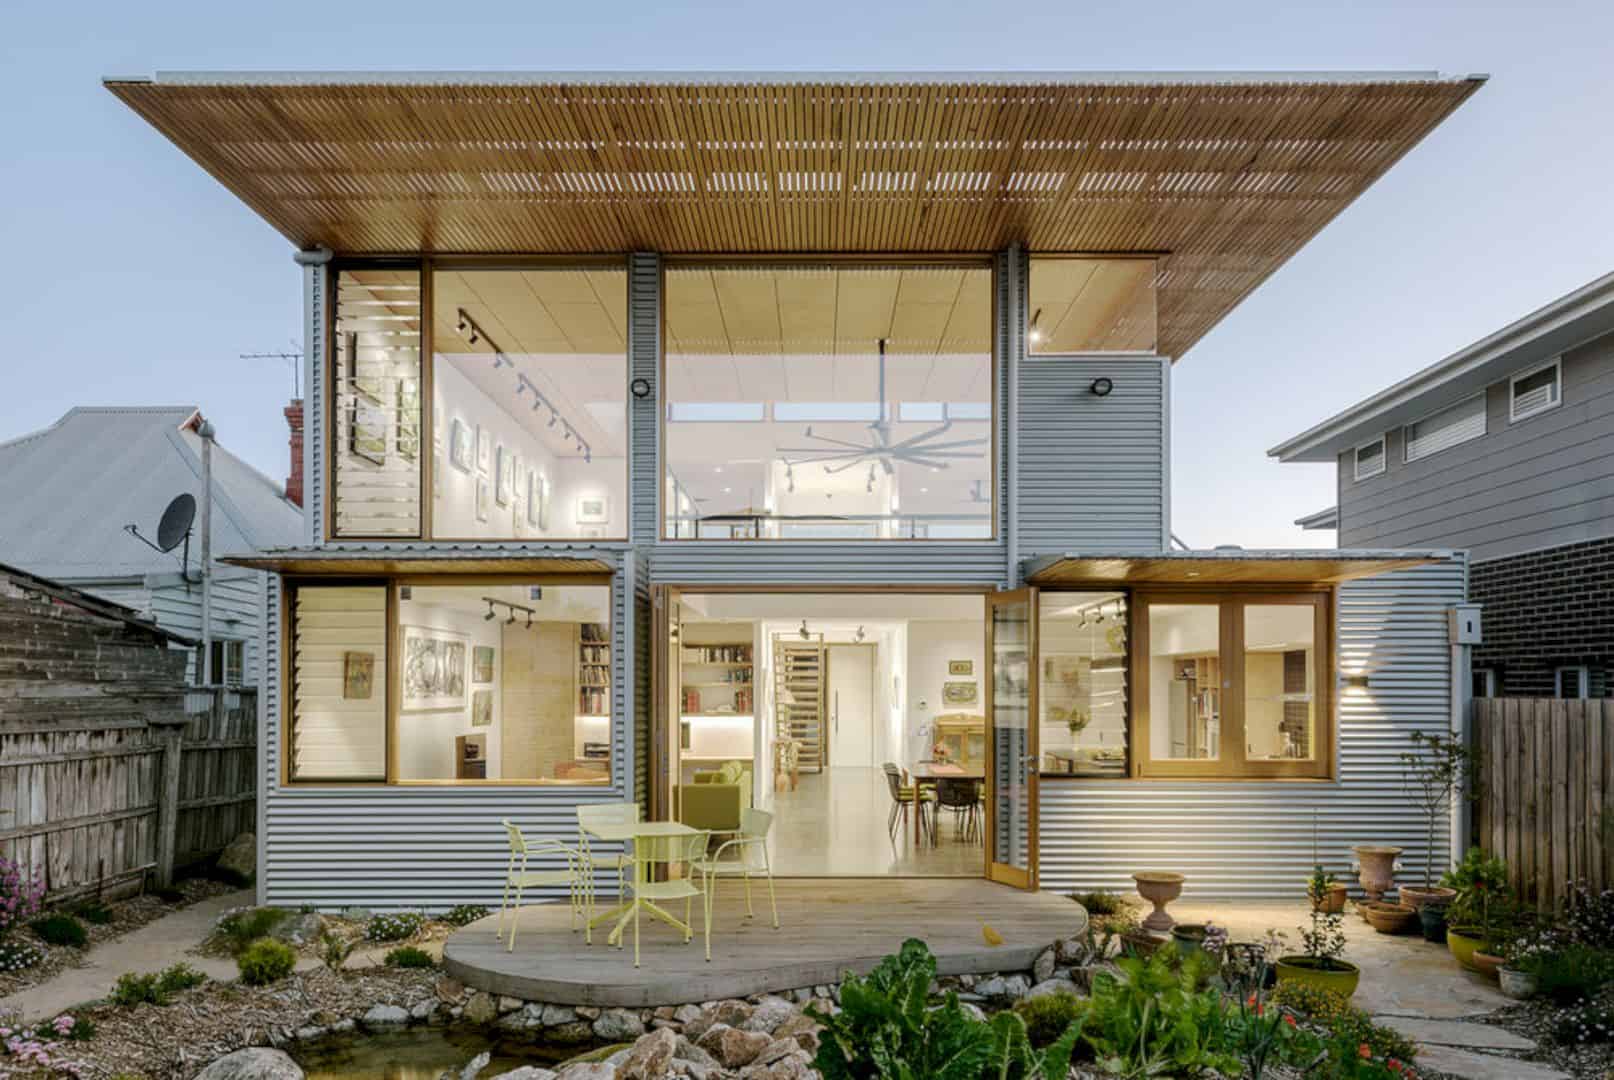 Gallery House Carnegie By Zen Architects 6